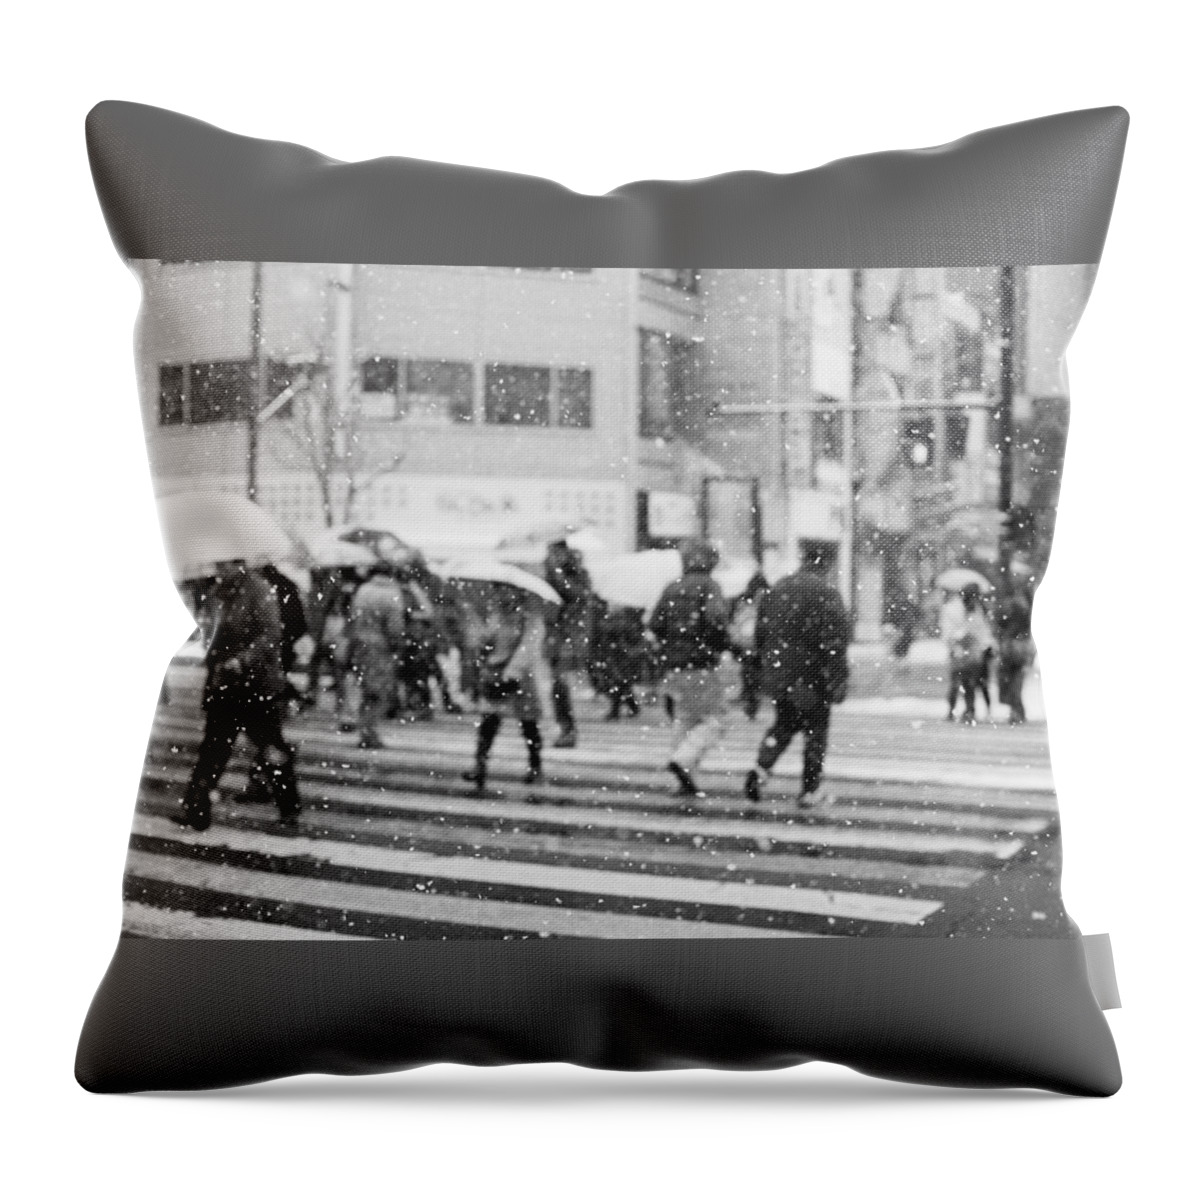 Snow Throw Pillow featuring the photograph Snow by Masahiro Ono